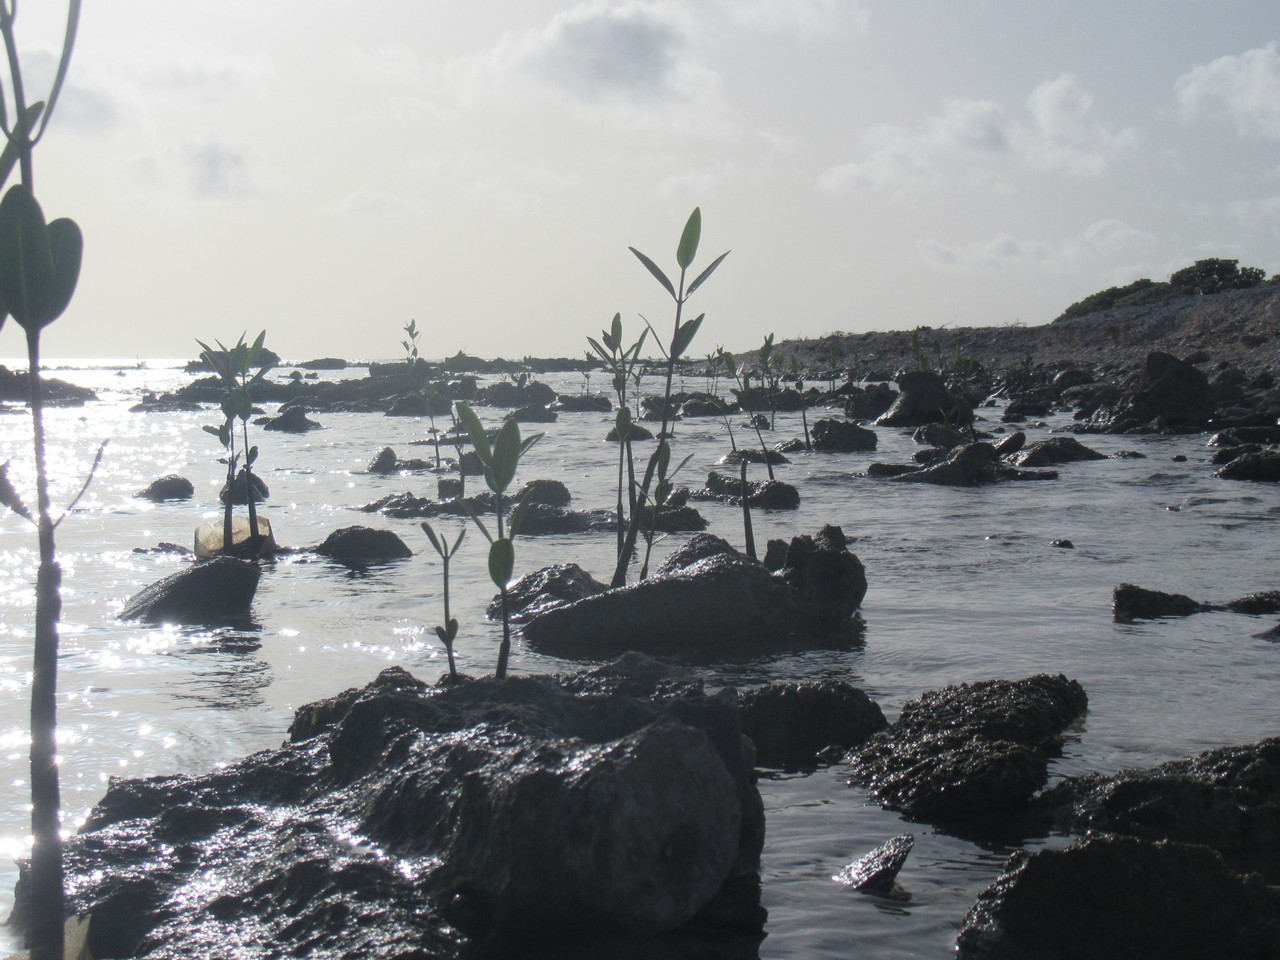 The shore is sprouting mangroves.